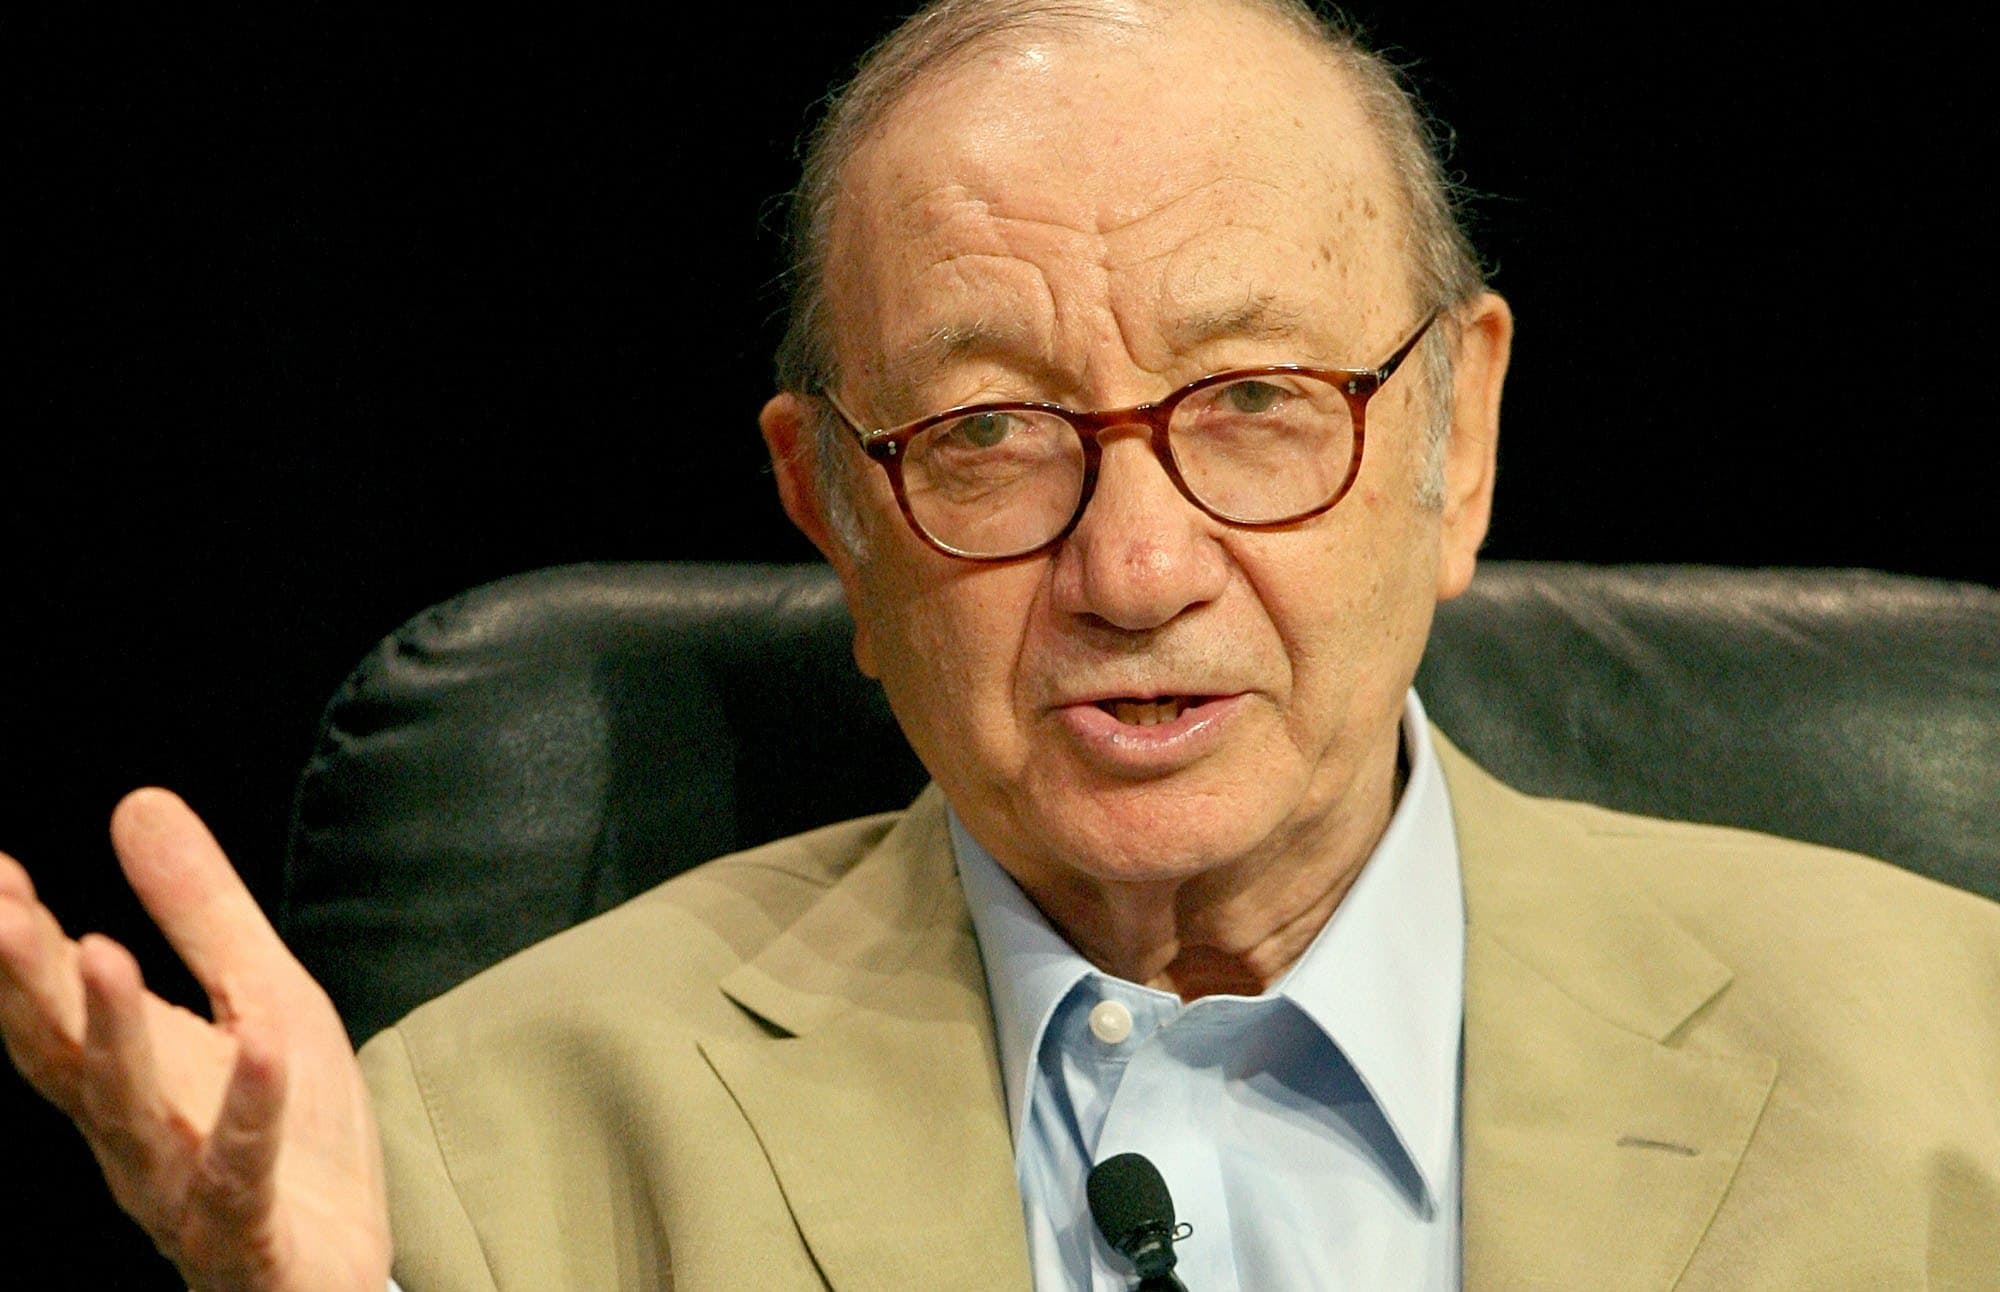 (file photo July 2006)  Neil Simon from "The Kennedy Center Presents: The 2006 Mark Twain Prize For American Humor" speaks onstage during the 2006 Summer Television Critics Association Press Tour for PBS held at the Ritz-Carlton Huntington Hotel in Pasadena, California.